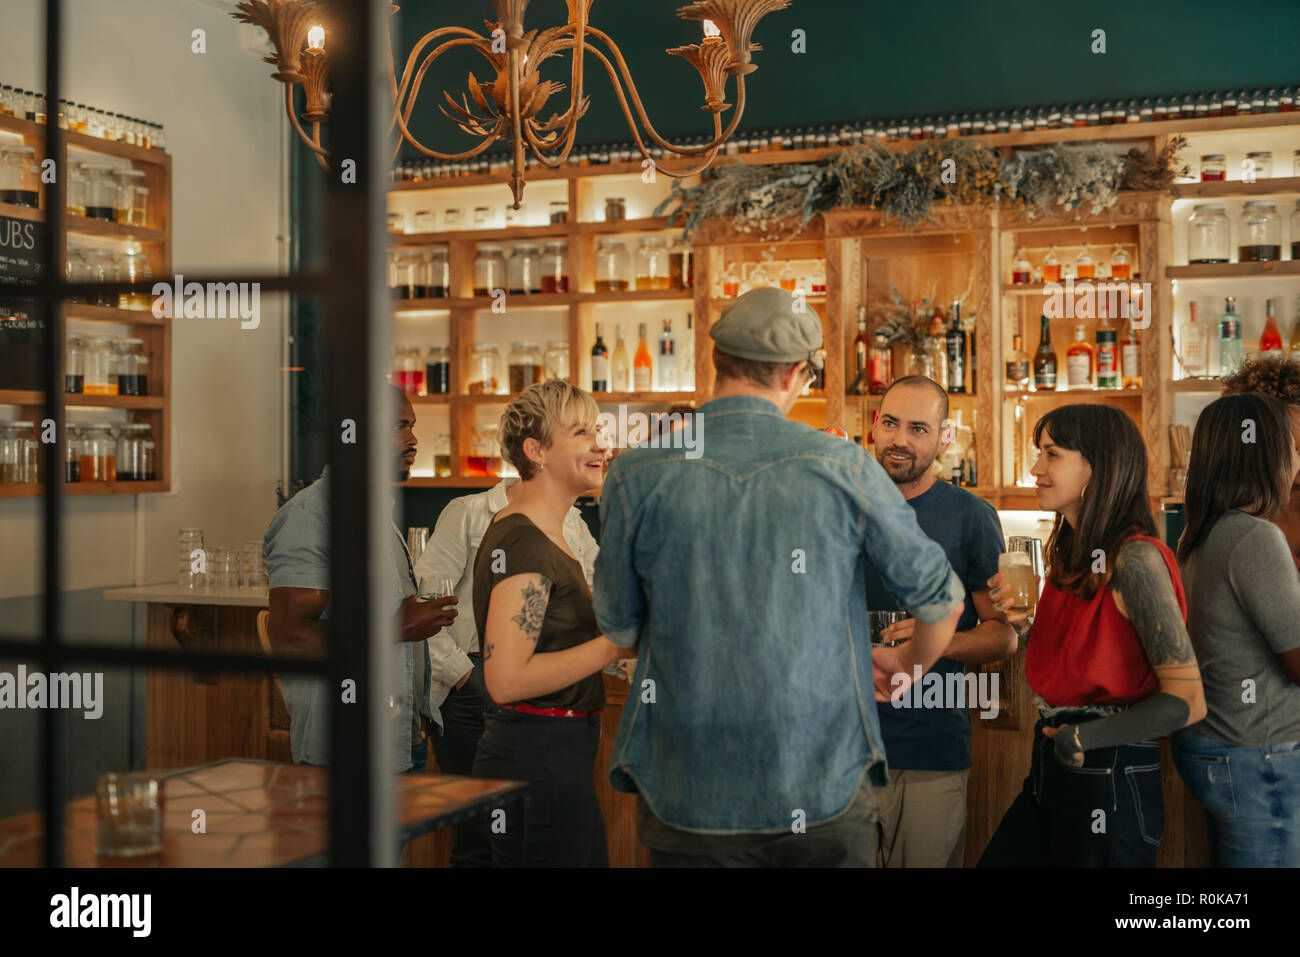 Group of friends standing in a bar having drinks together Stock Photo